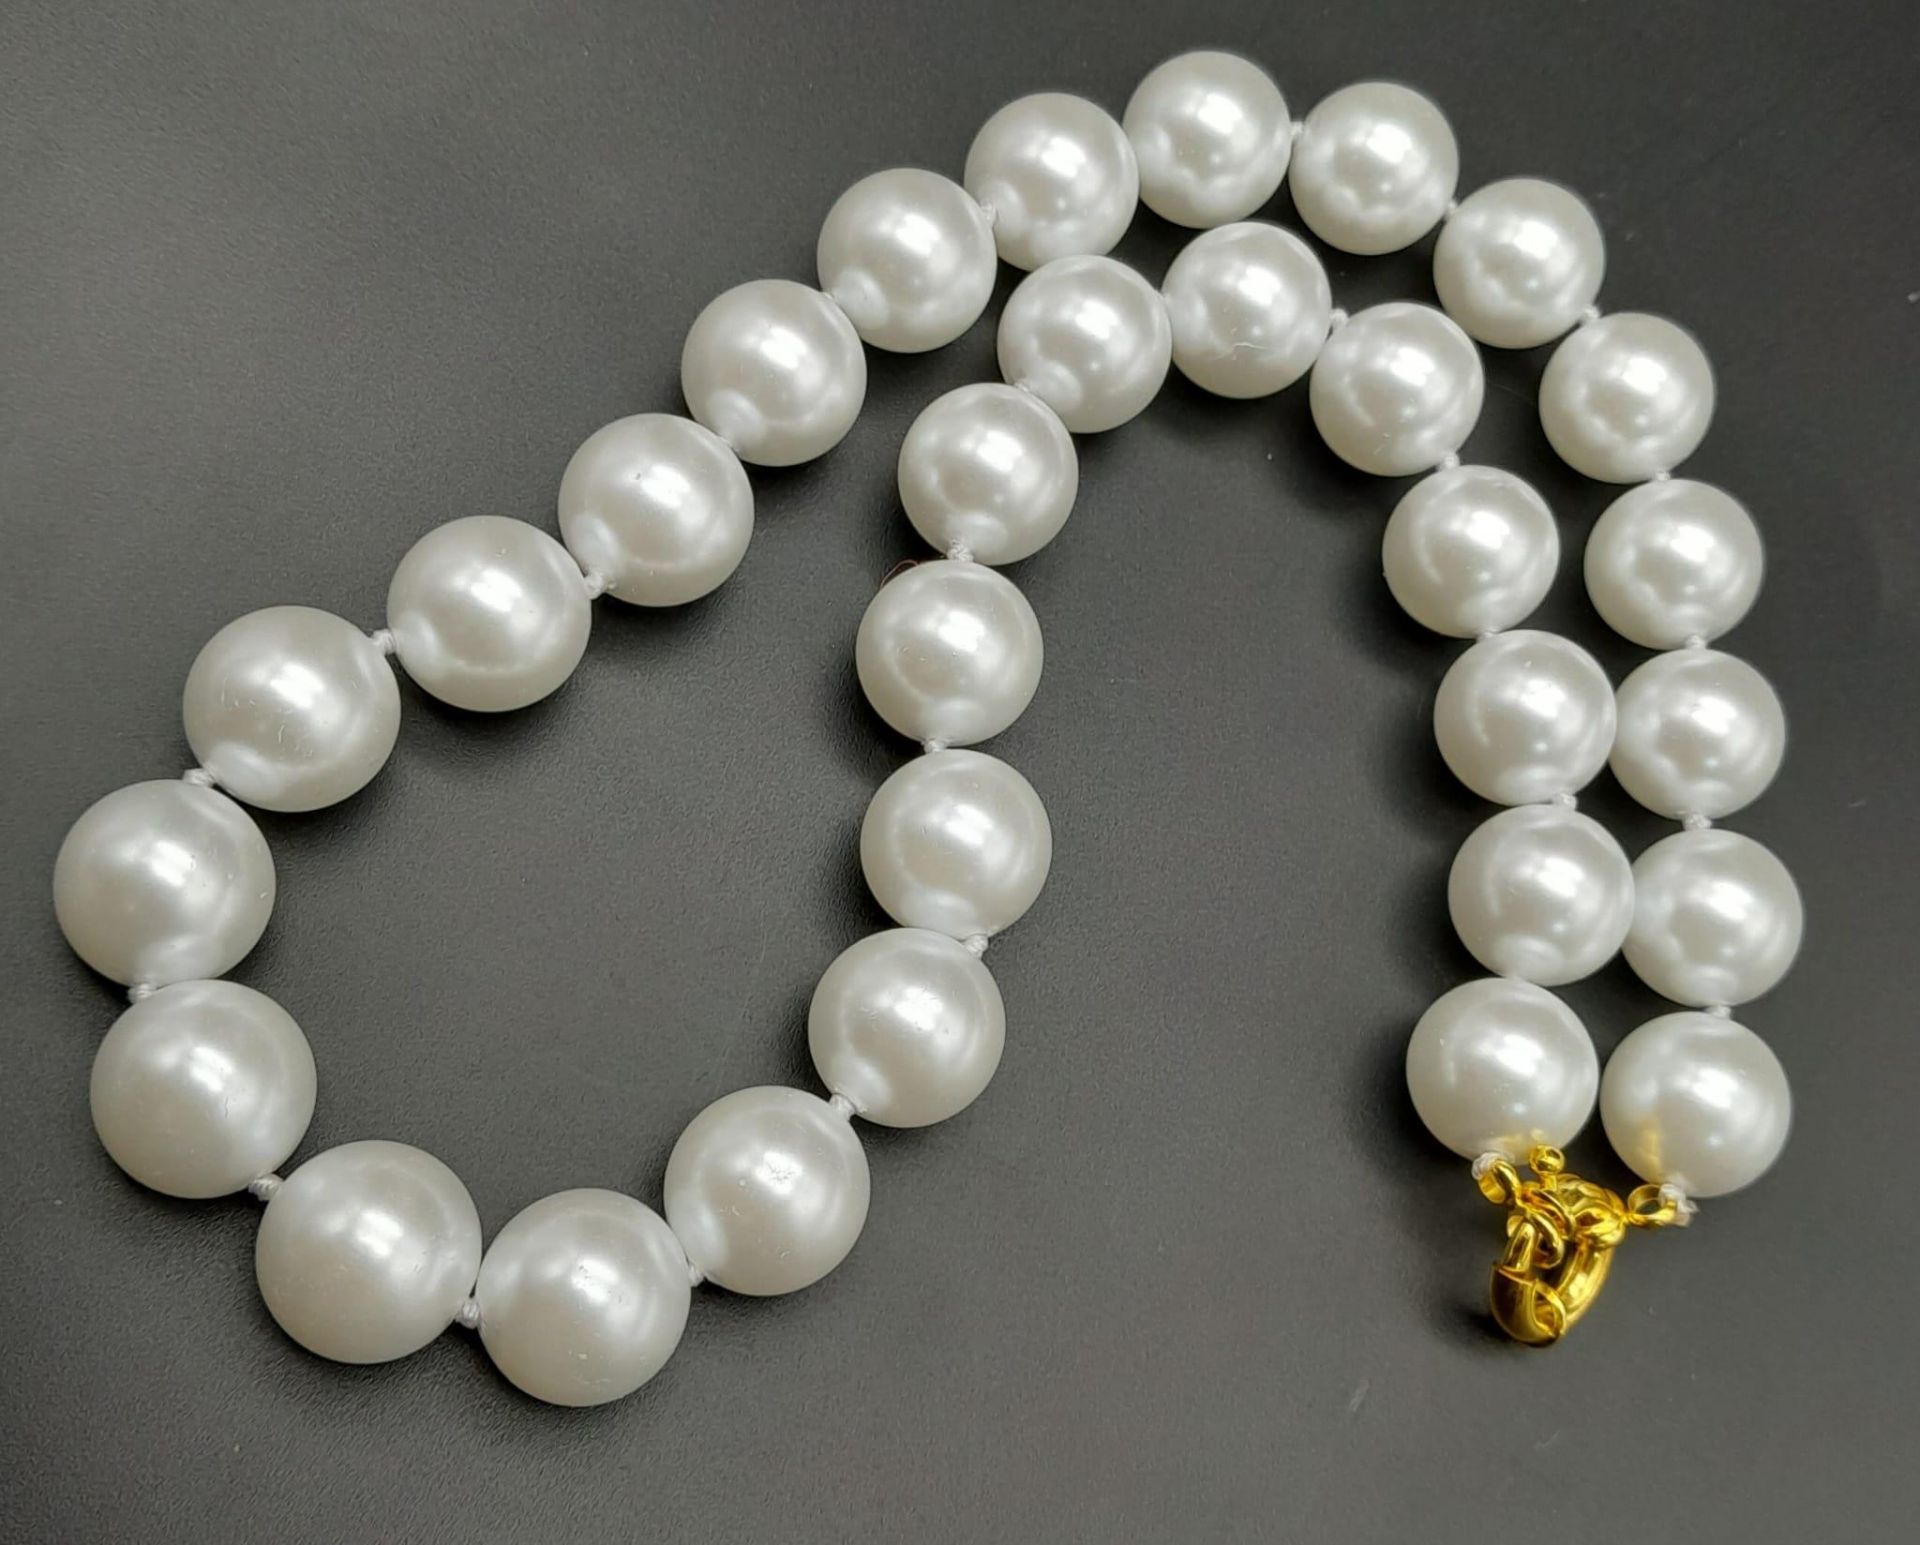 A Lovely Bright White South Sea Pearl Shell Bead Necklace. 14mm beads. 42cm necklace length. - Bild 3 aus 5